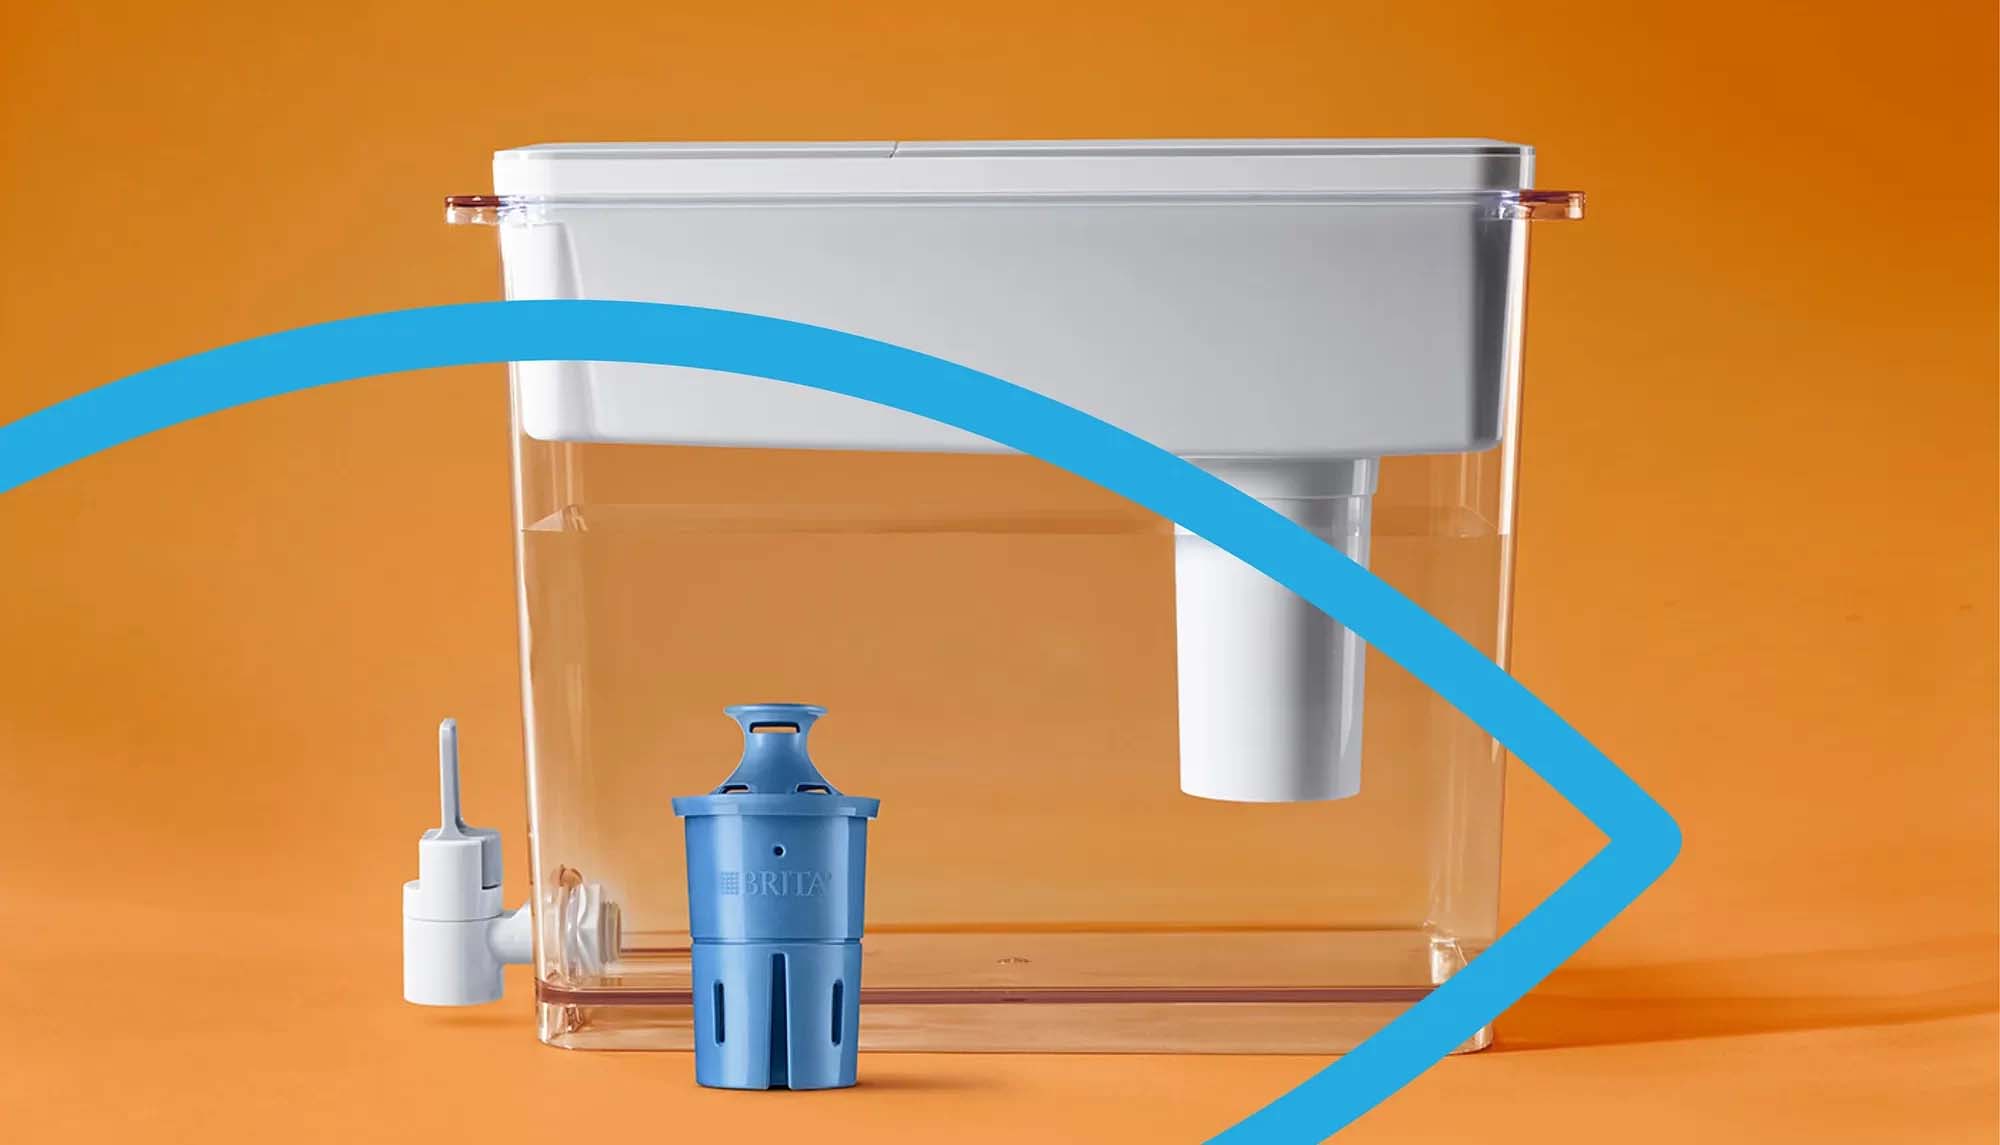 A highlighted area of premedia services and brand image management for Brita showcasing their water filtration water container with replaceable water filter.